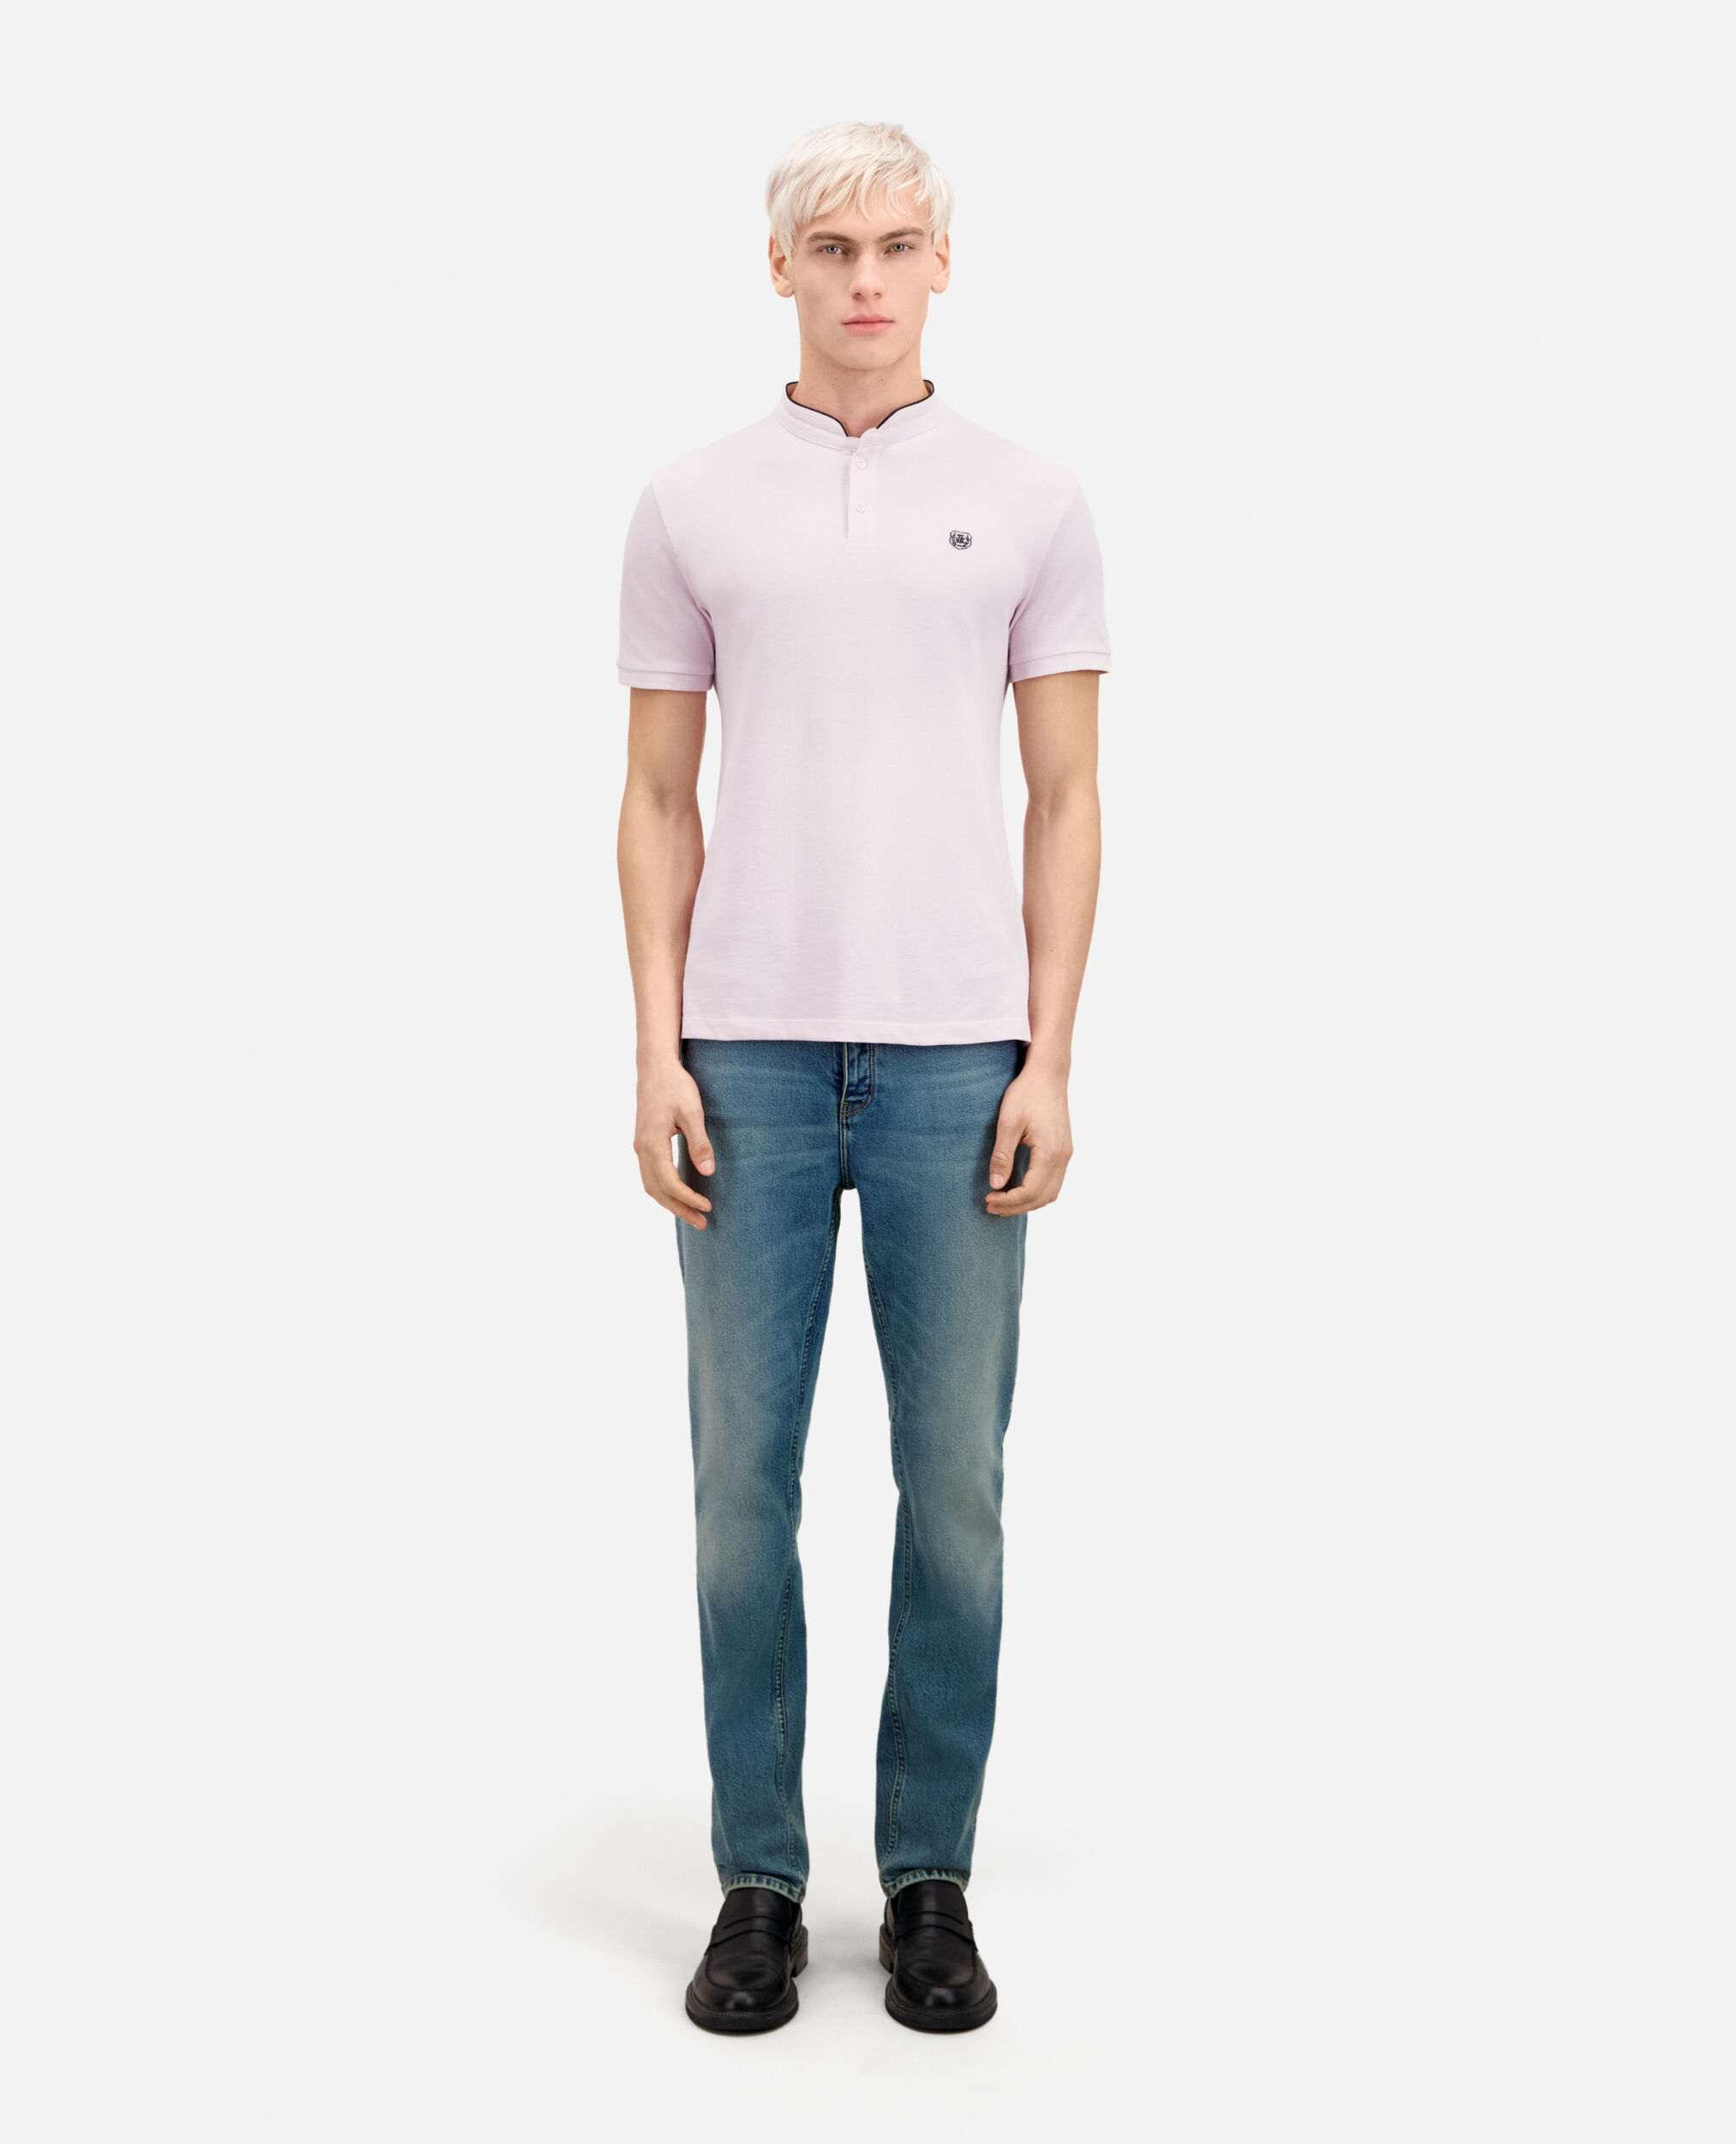 Rosa Poloshirt aus Baumwolle, PALE PINK, hi-res image number null